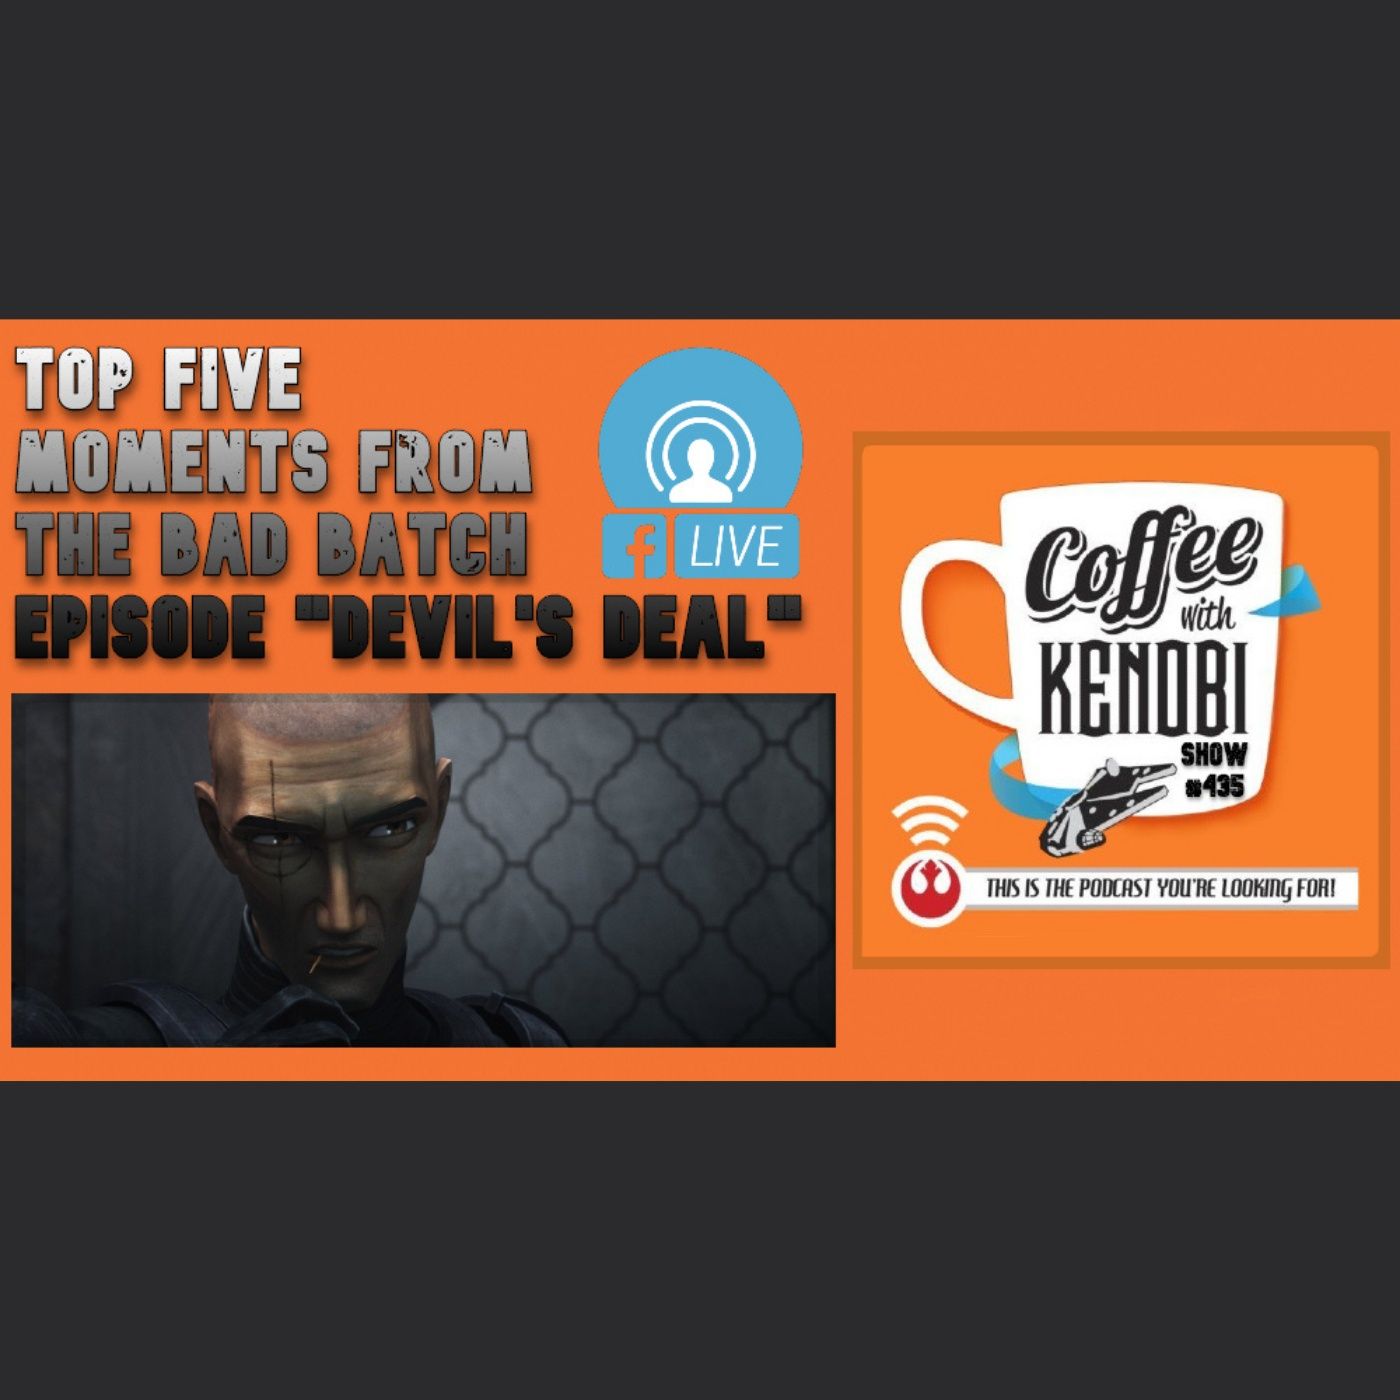 CWK Show #435 LIVE: Top Five Moments From Star Wars: The Bad Batch 